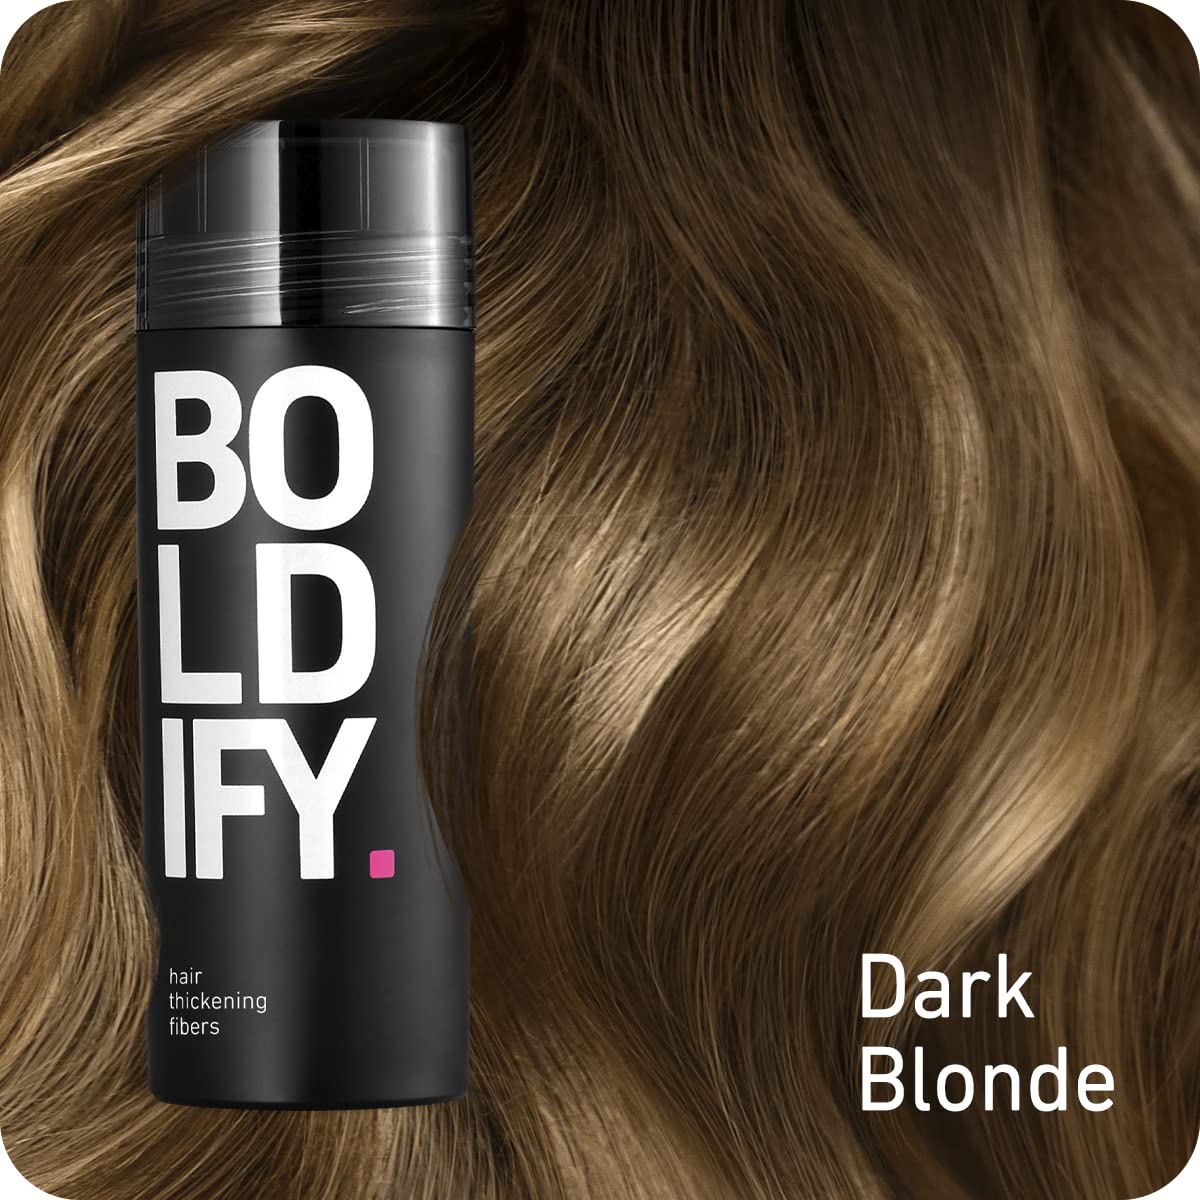 BOLDIFY Hair Fibers for Thinning Hair (DARK BLONDE) Undetectable - 56gr Bottle - Completely Conceals Hair Loss in 15 Sec - Hair Thickener for Fine Hair for Women & Men